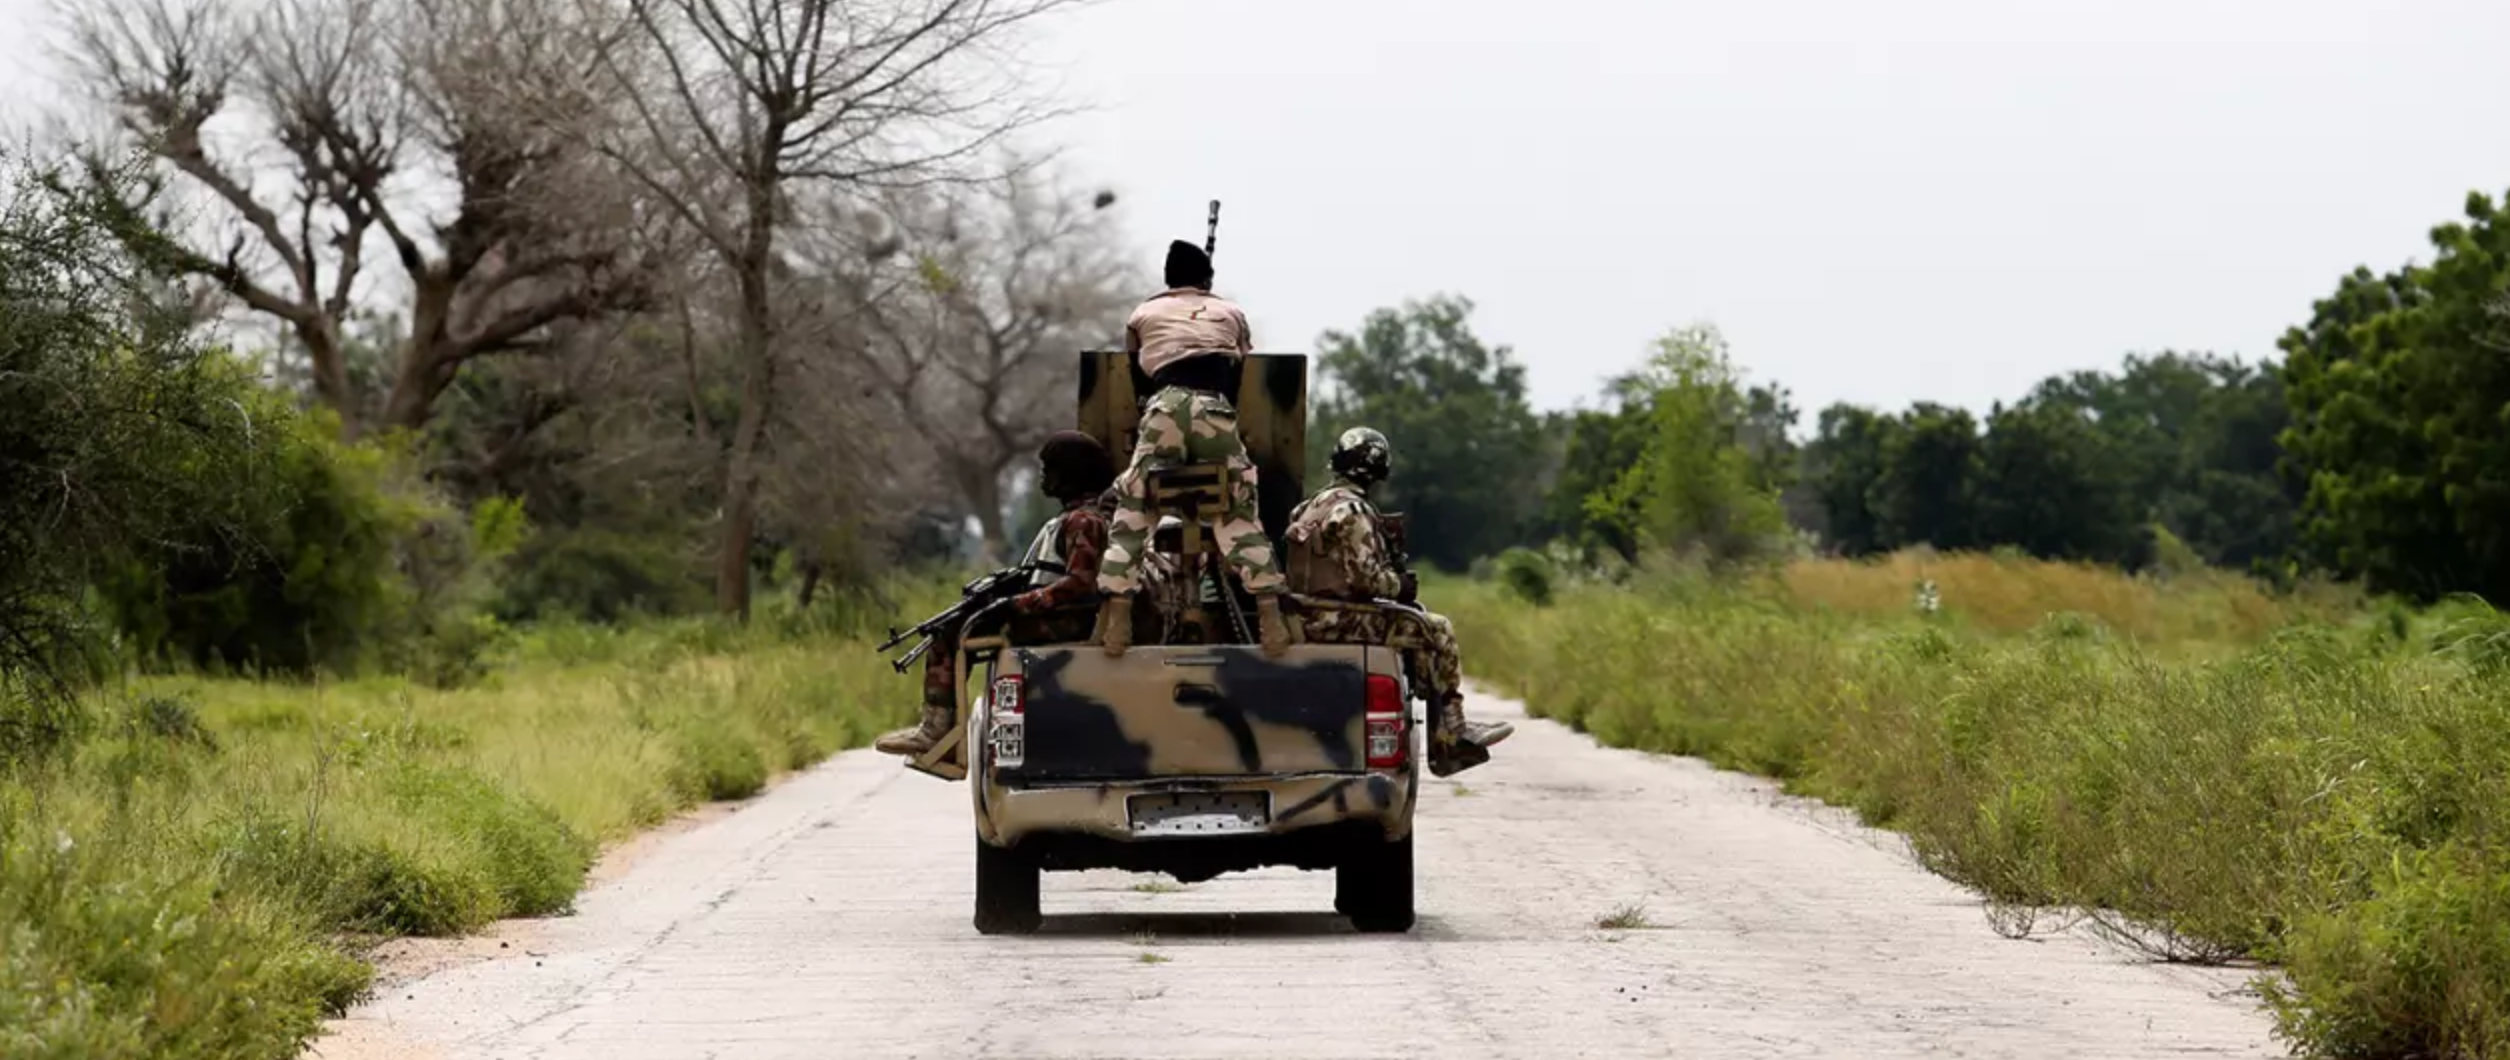 Islamist militants behead at least 10 farmers in Nigeria's Borno state, residents say